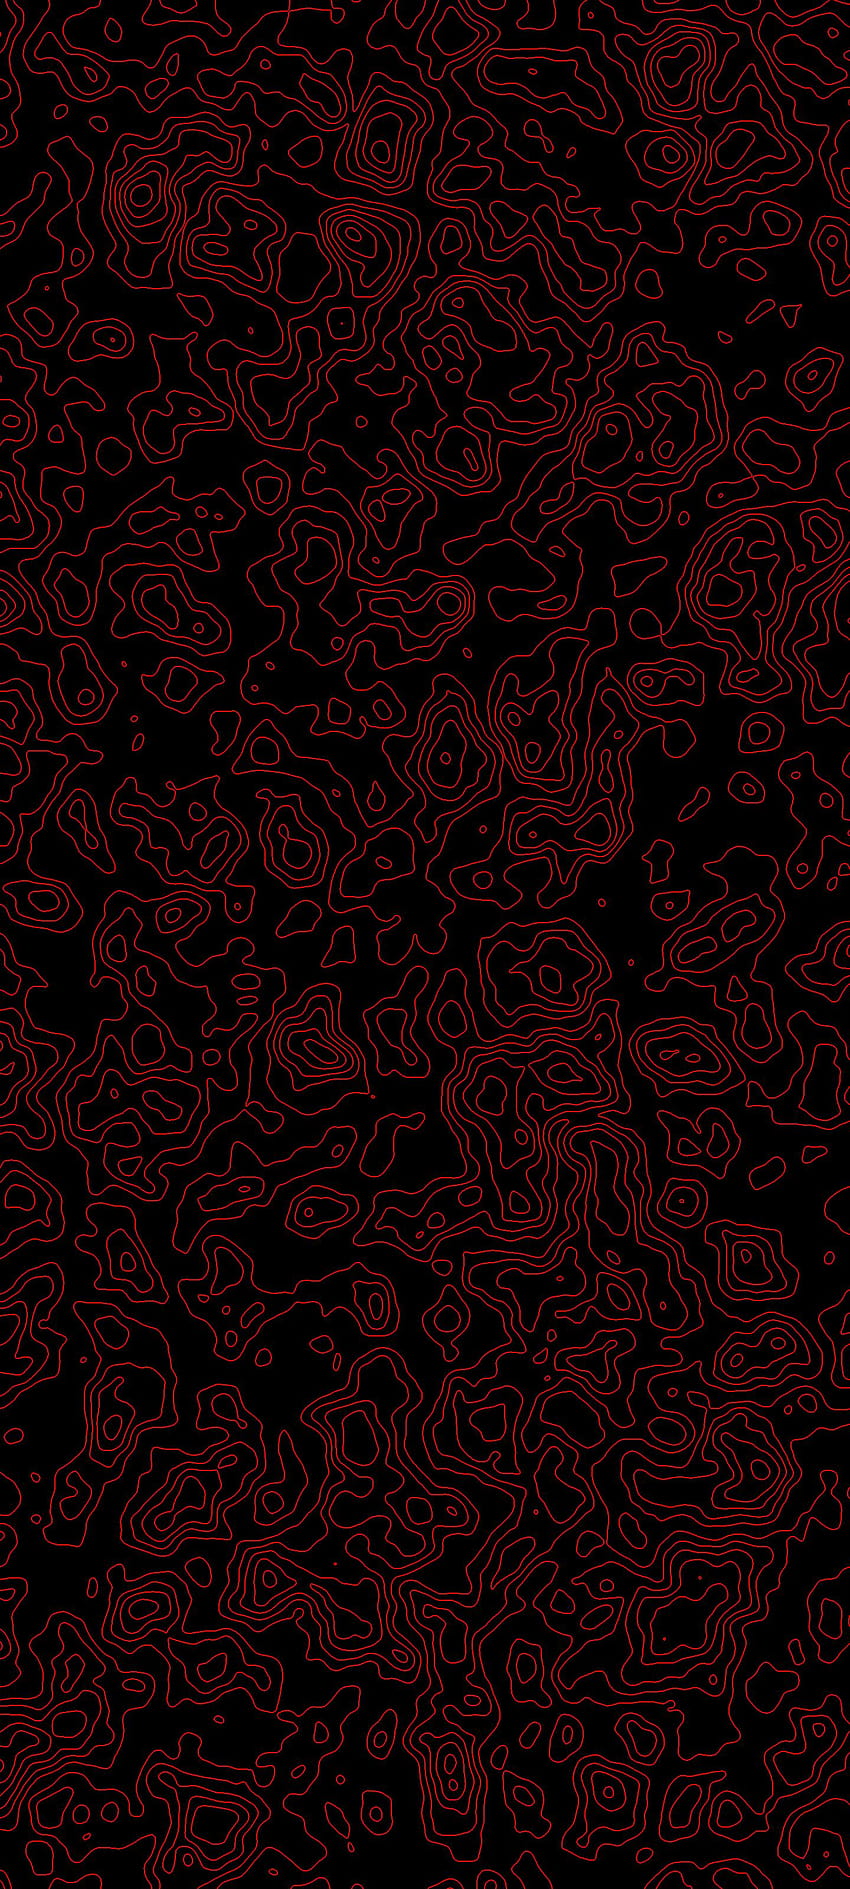 Damascus/Topographic AMOLED Backgrounds, topographic iphone HD phone wallpaper